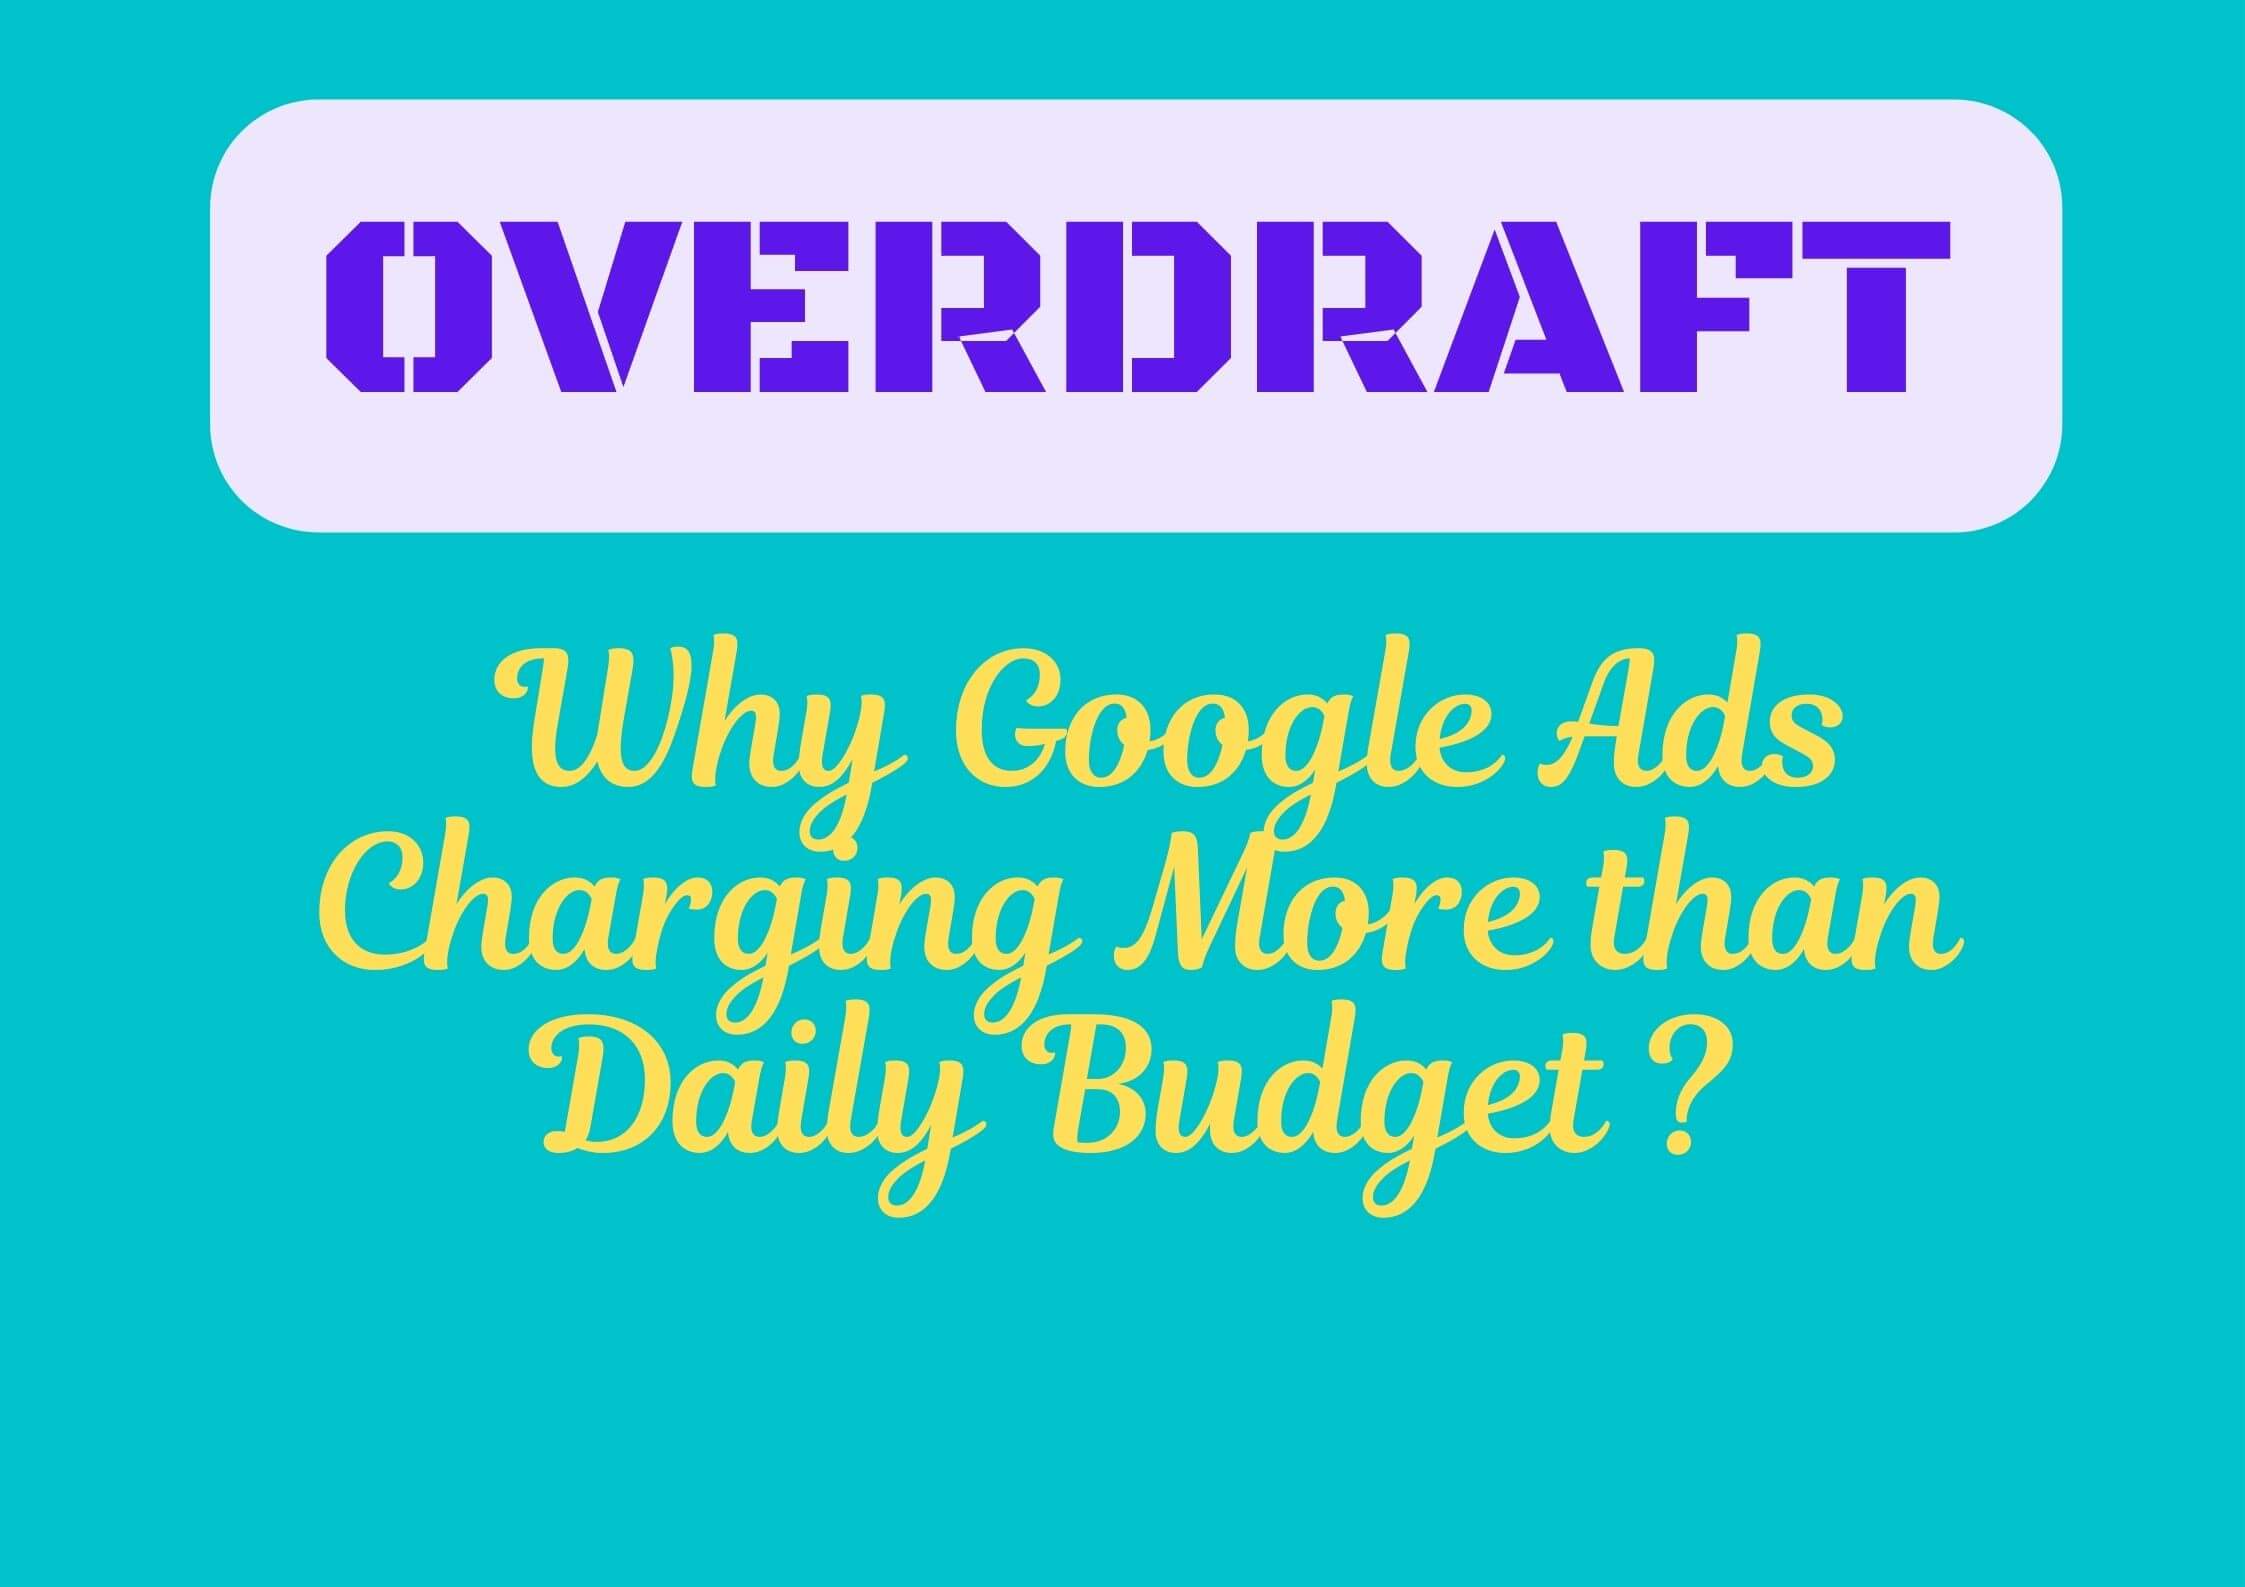 Google Ads Overdraft; Charging More than Daily Budget 